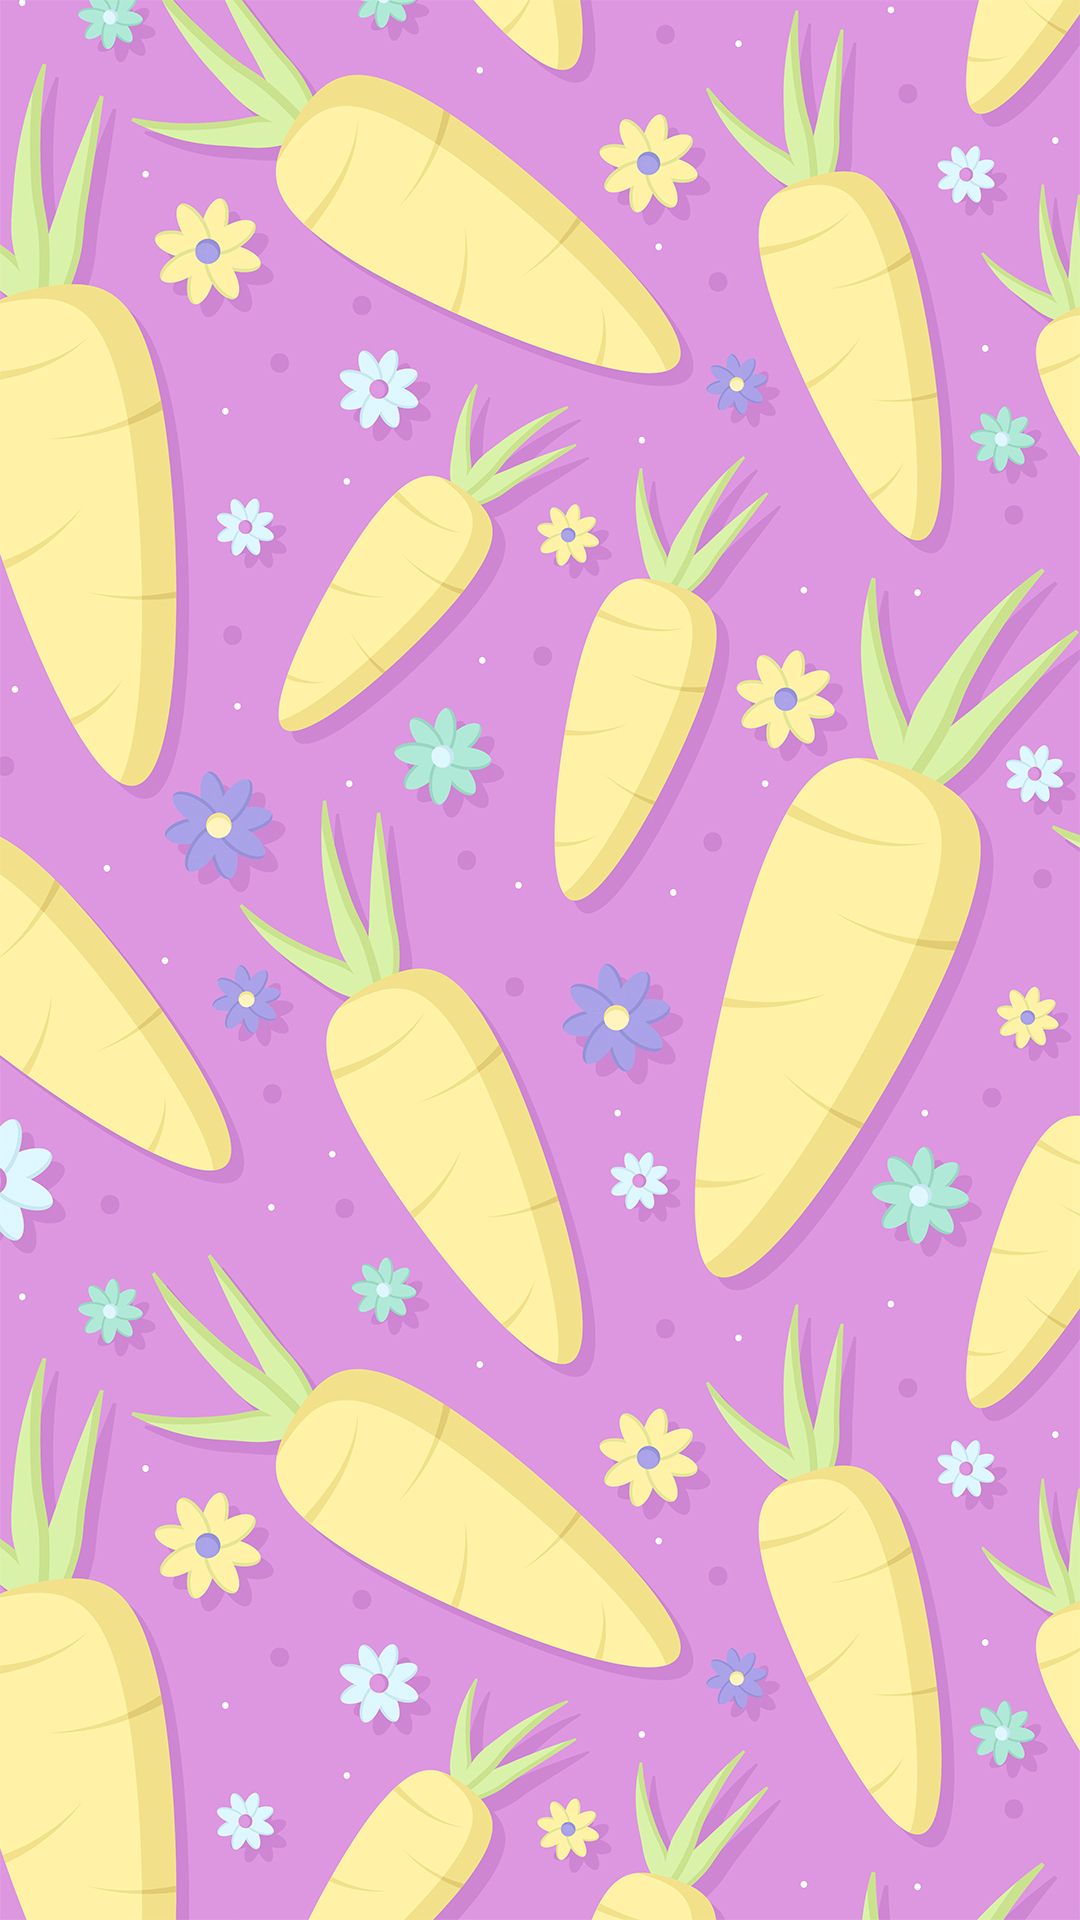 A pattern of yellow carrots and blue flowers on a purple background - Easter